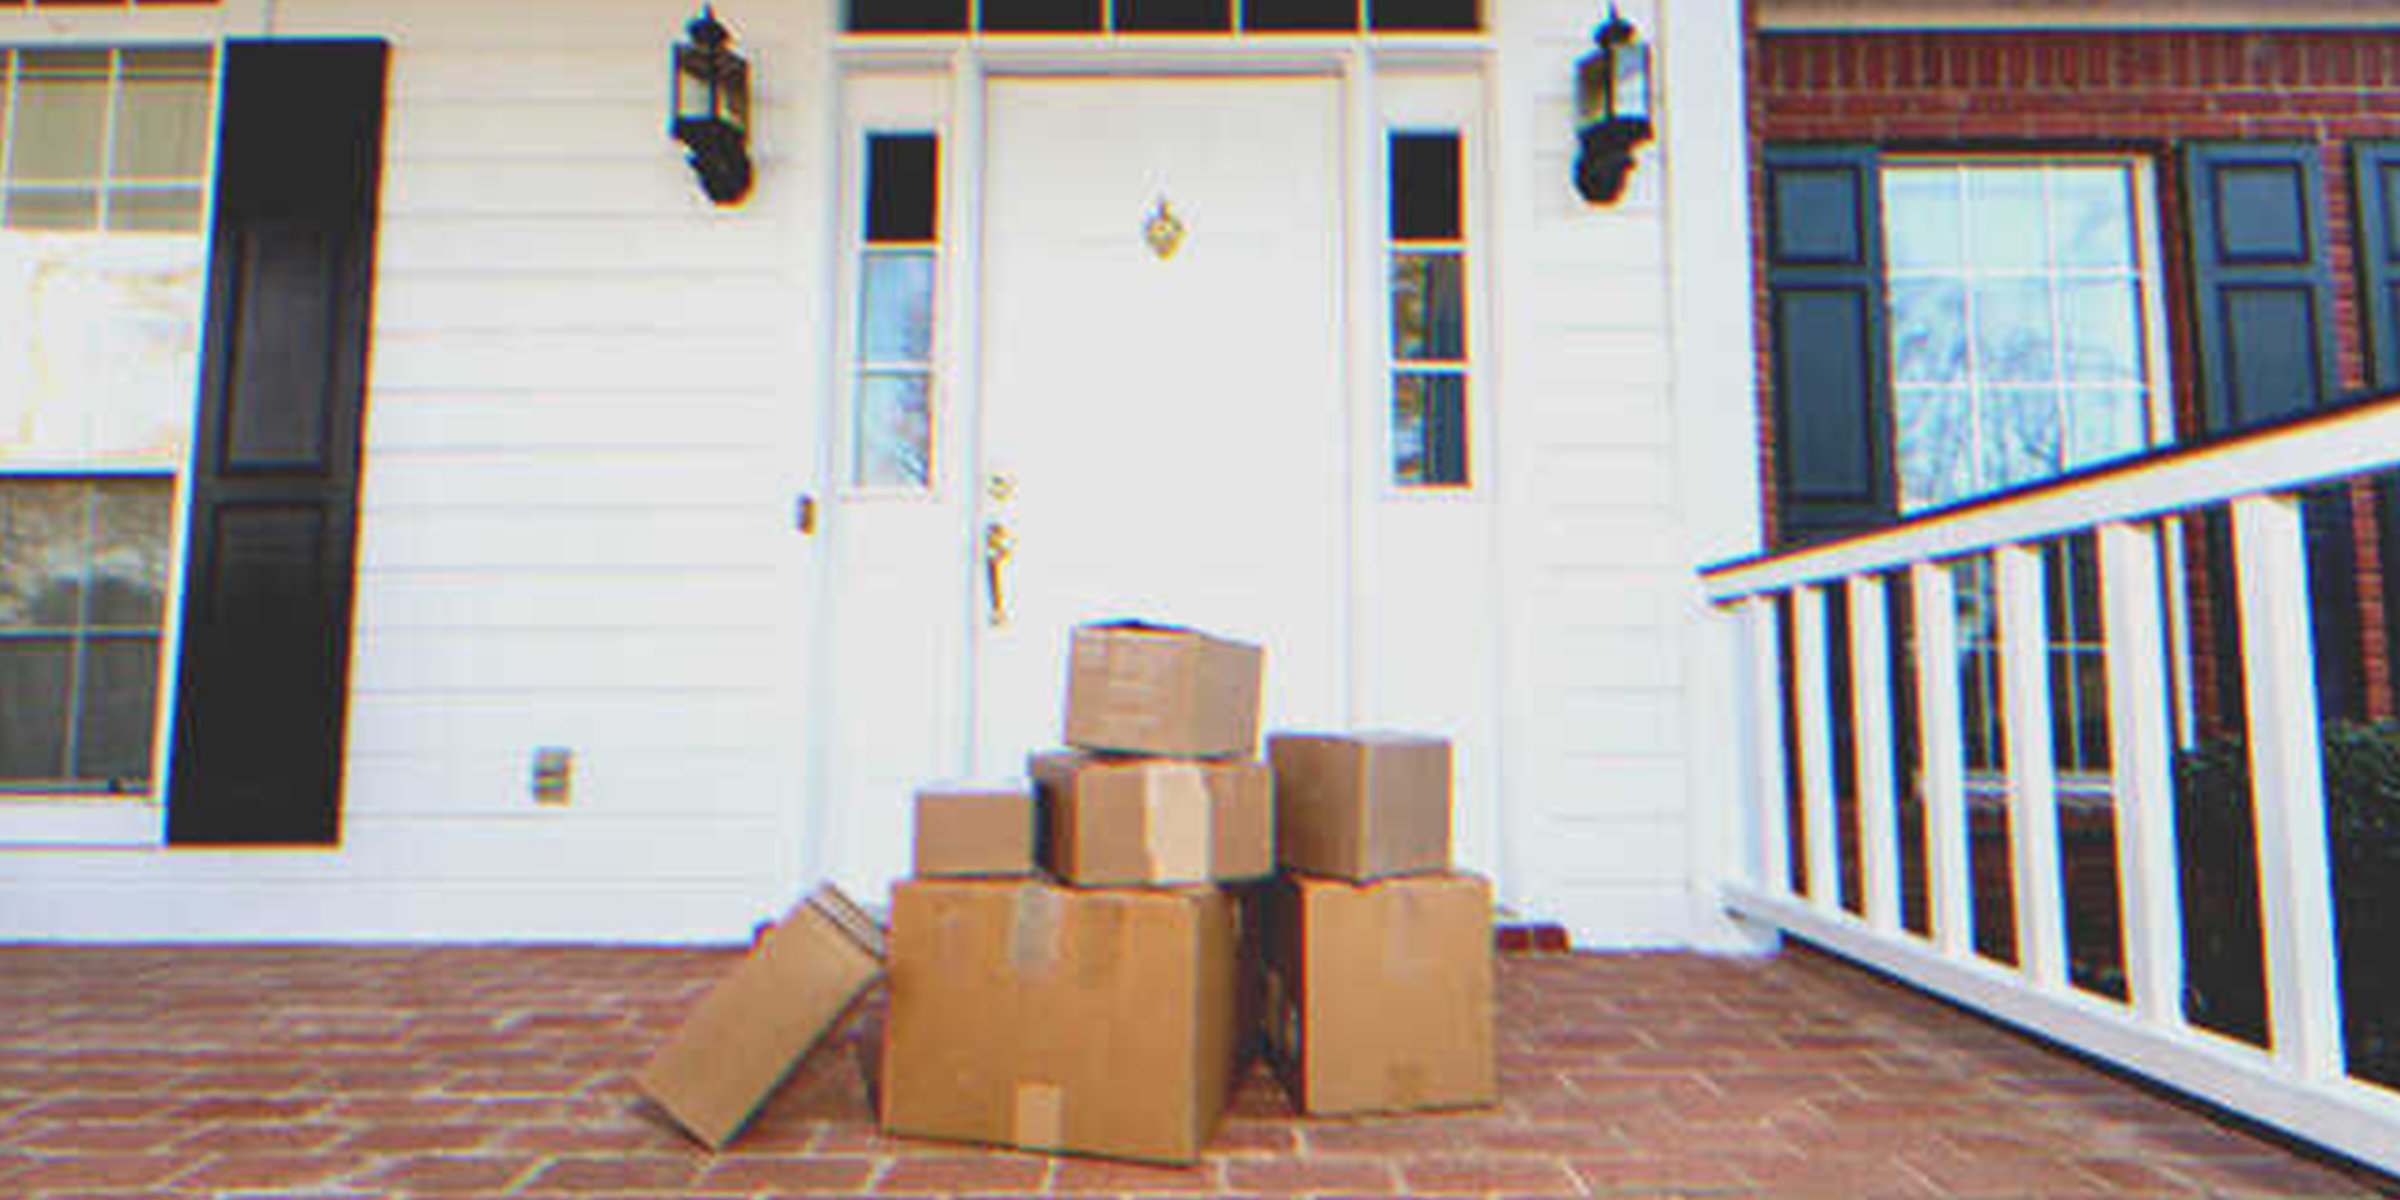 Some boxes in front of a house's door | Source: Shutterstock